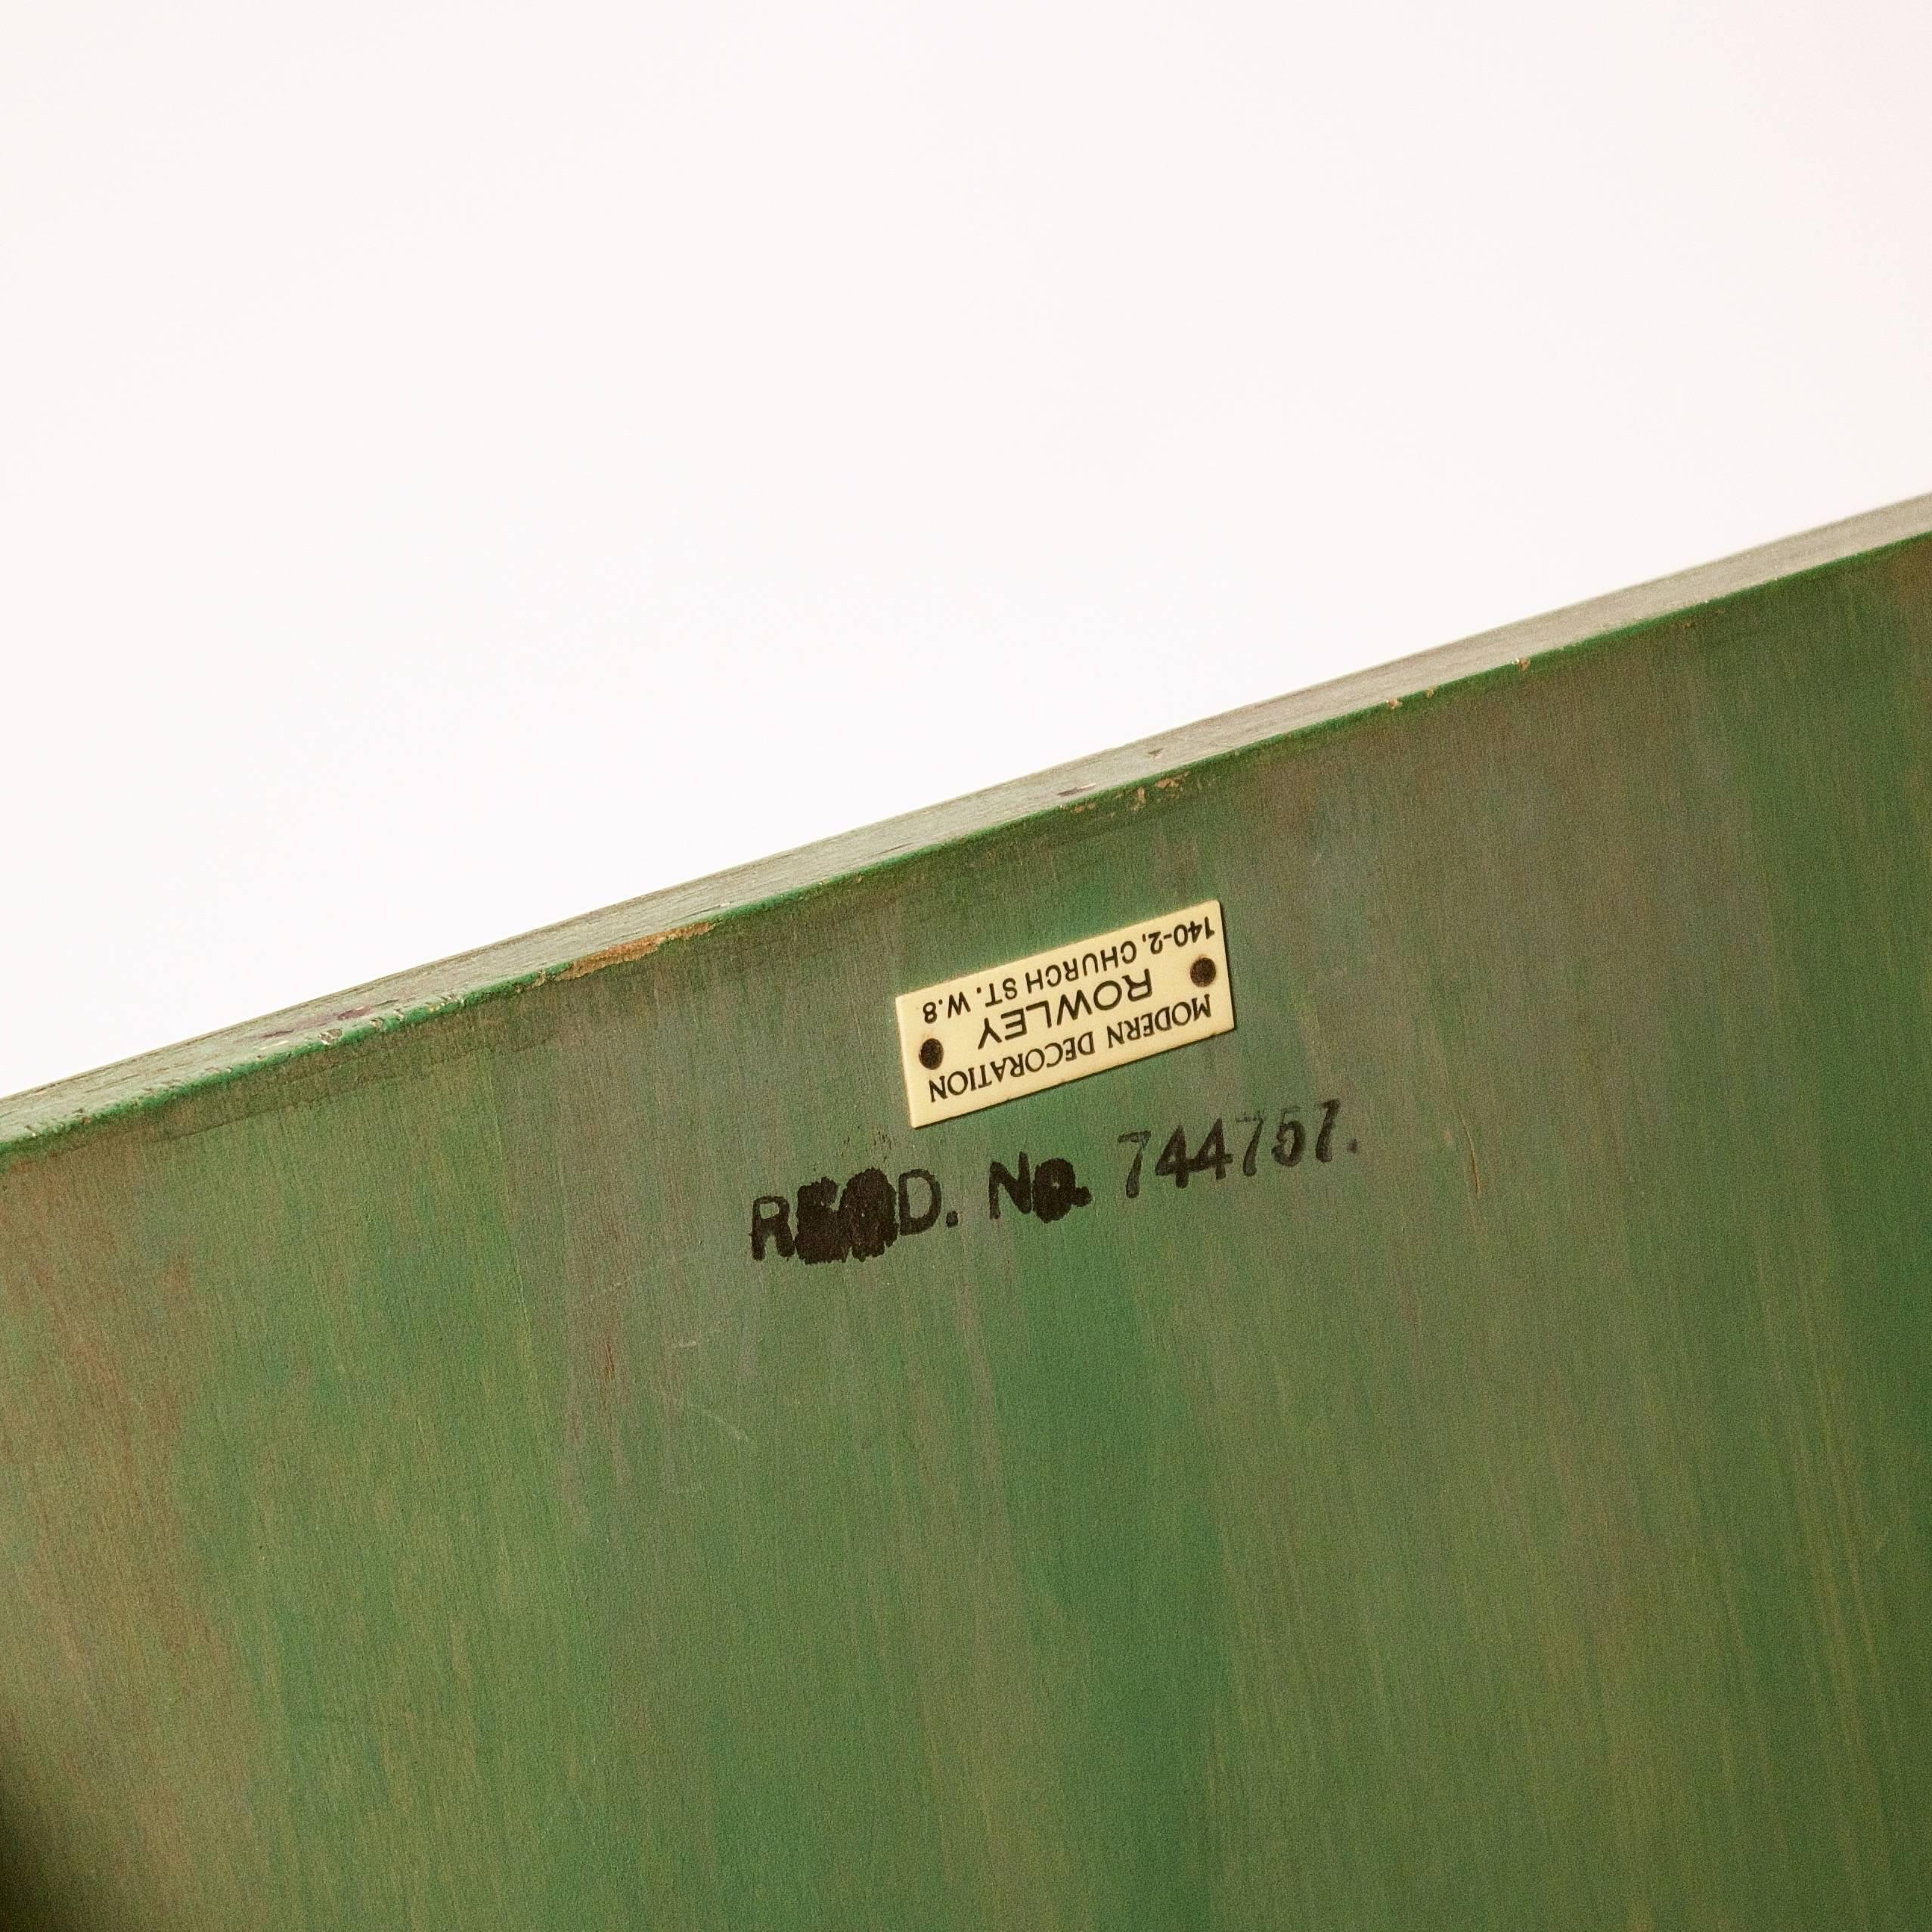 Hand-Painted Green Painted Wall-Mounted Student's Desk by the Rowley Gallery